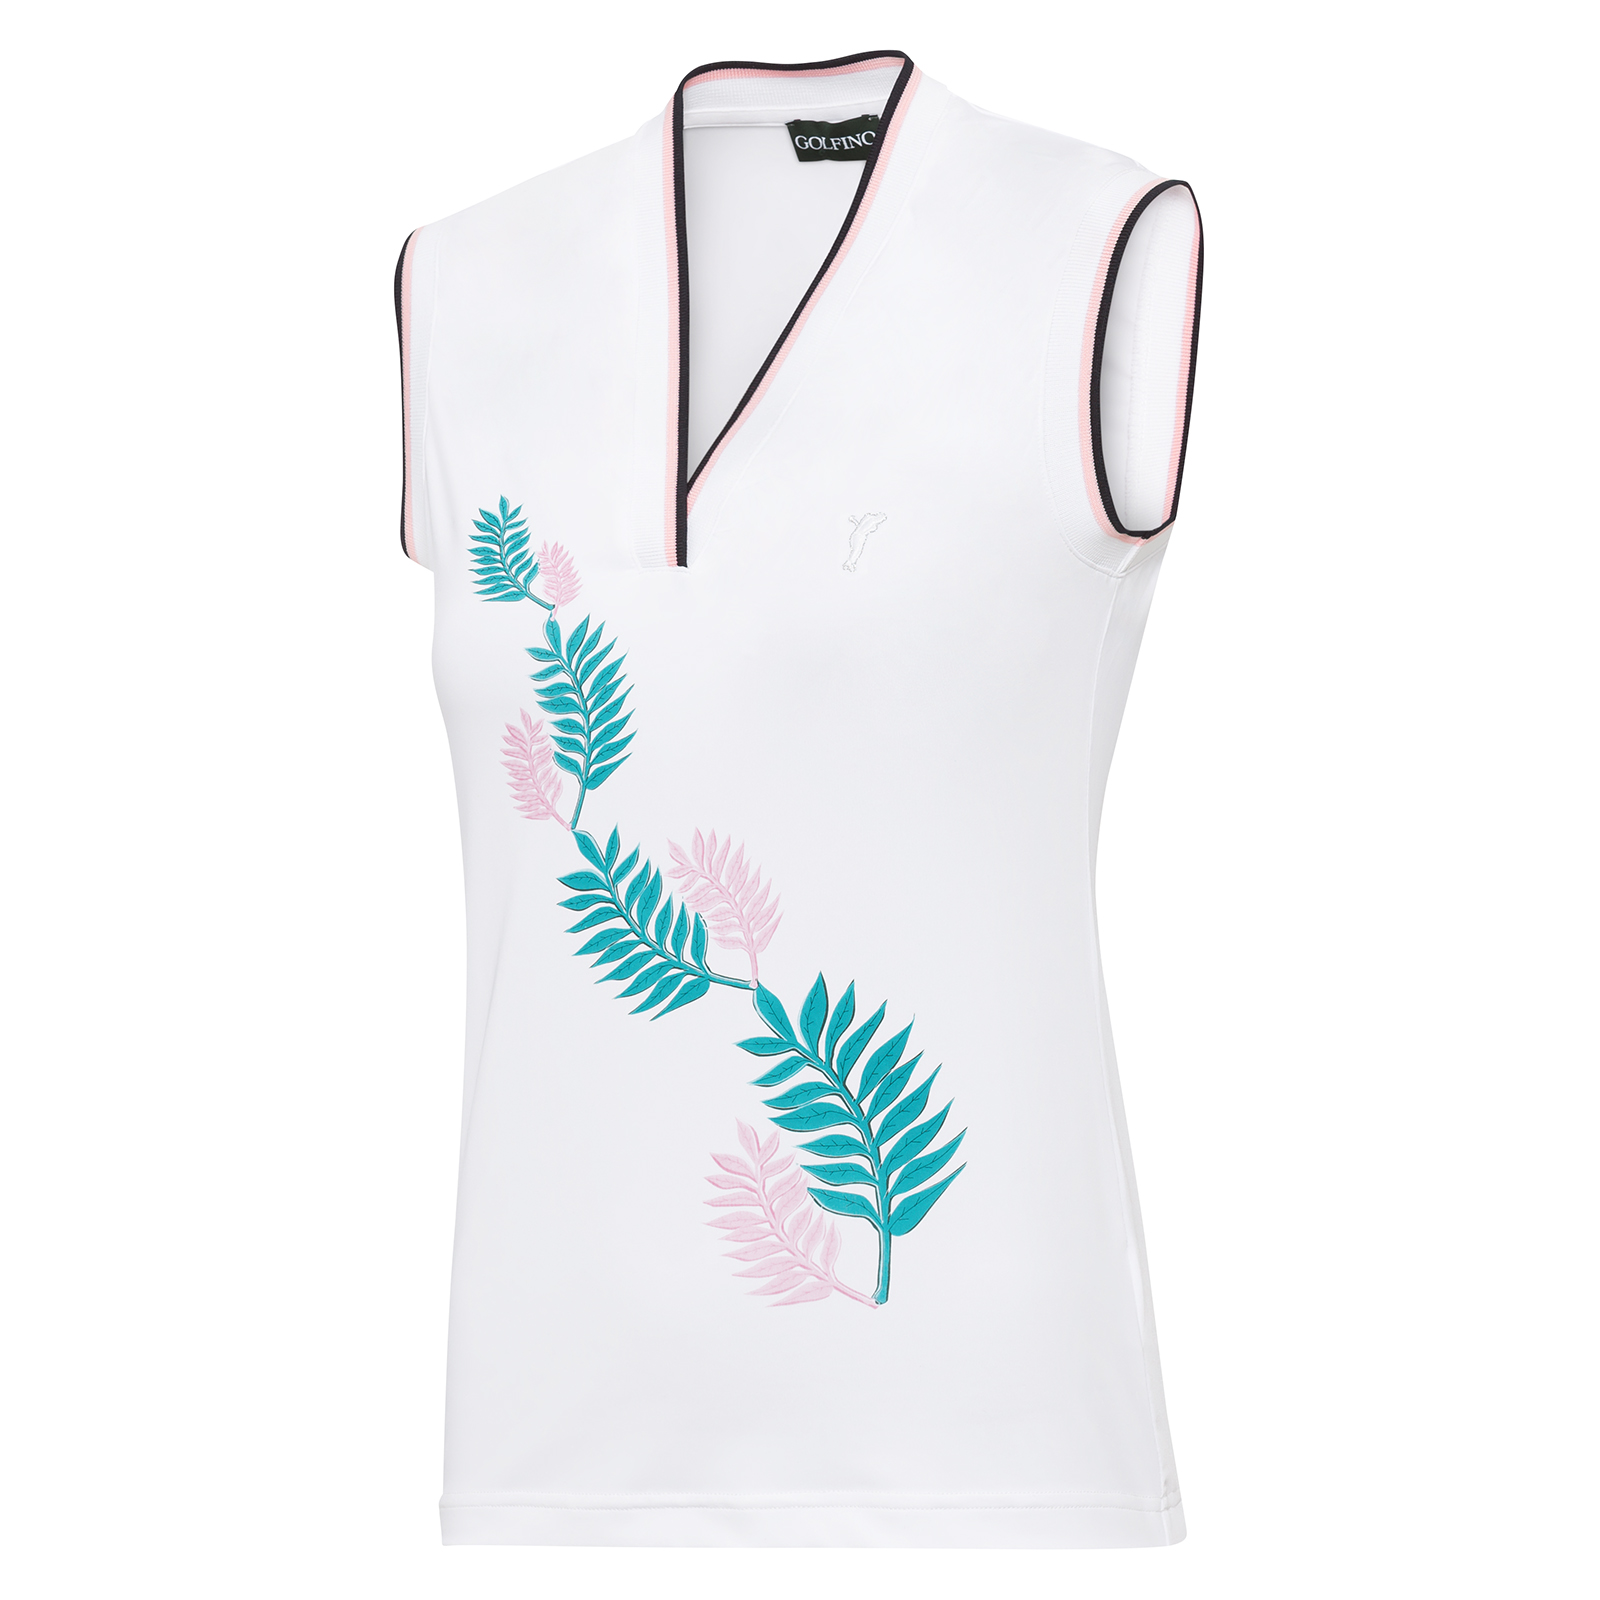 Ladies' sleeveless top with an exotic touch